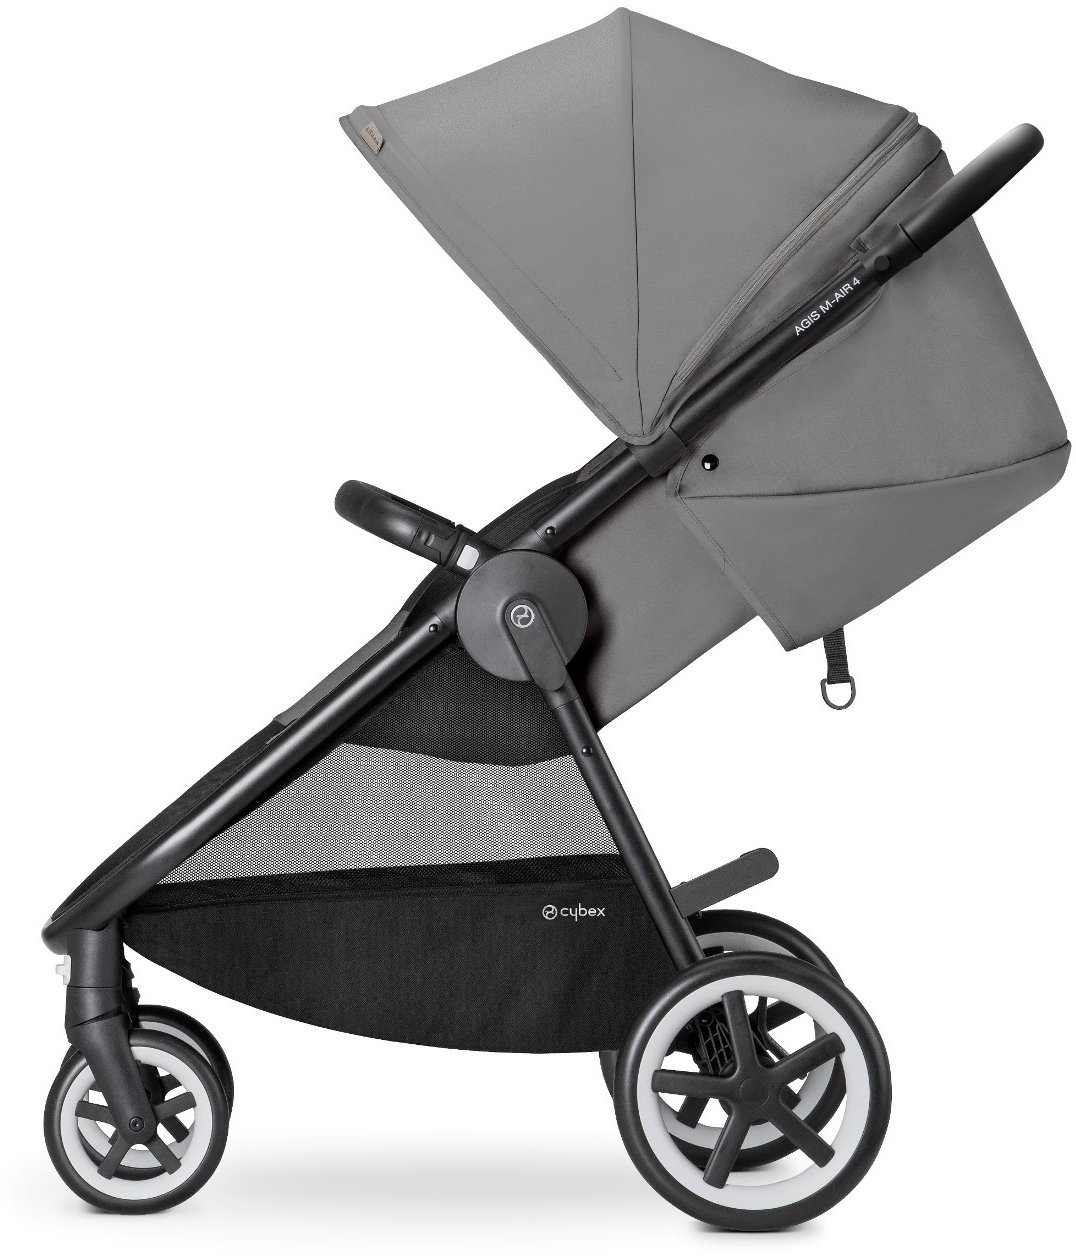 Propuesta alternativa Resplandor cable Cybex Agis M-Air 4 stroller reviews, questions, dimensions | pushchair  experts advise @Strollberry